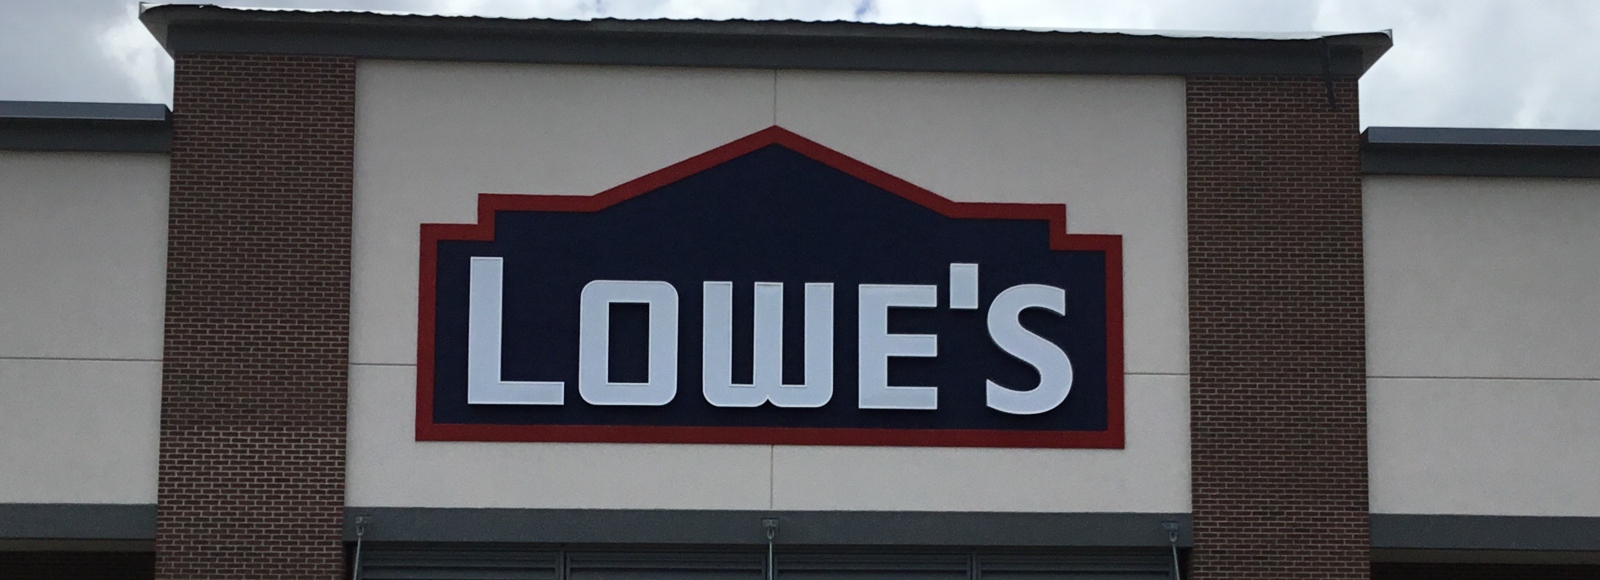 large lowe's sign, custom sign, home improvement store signage